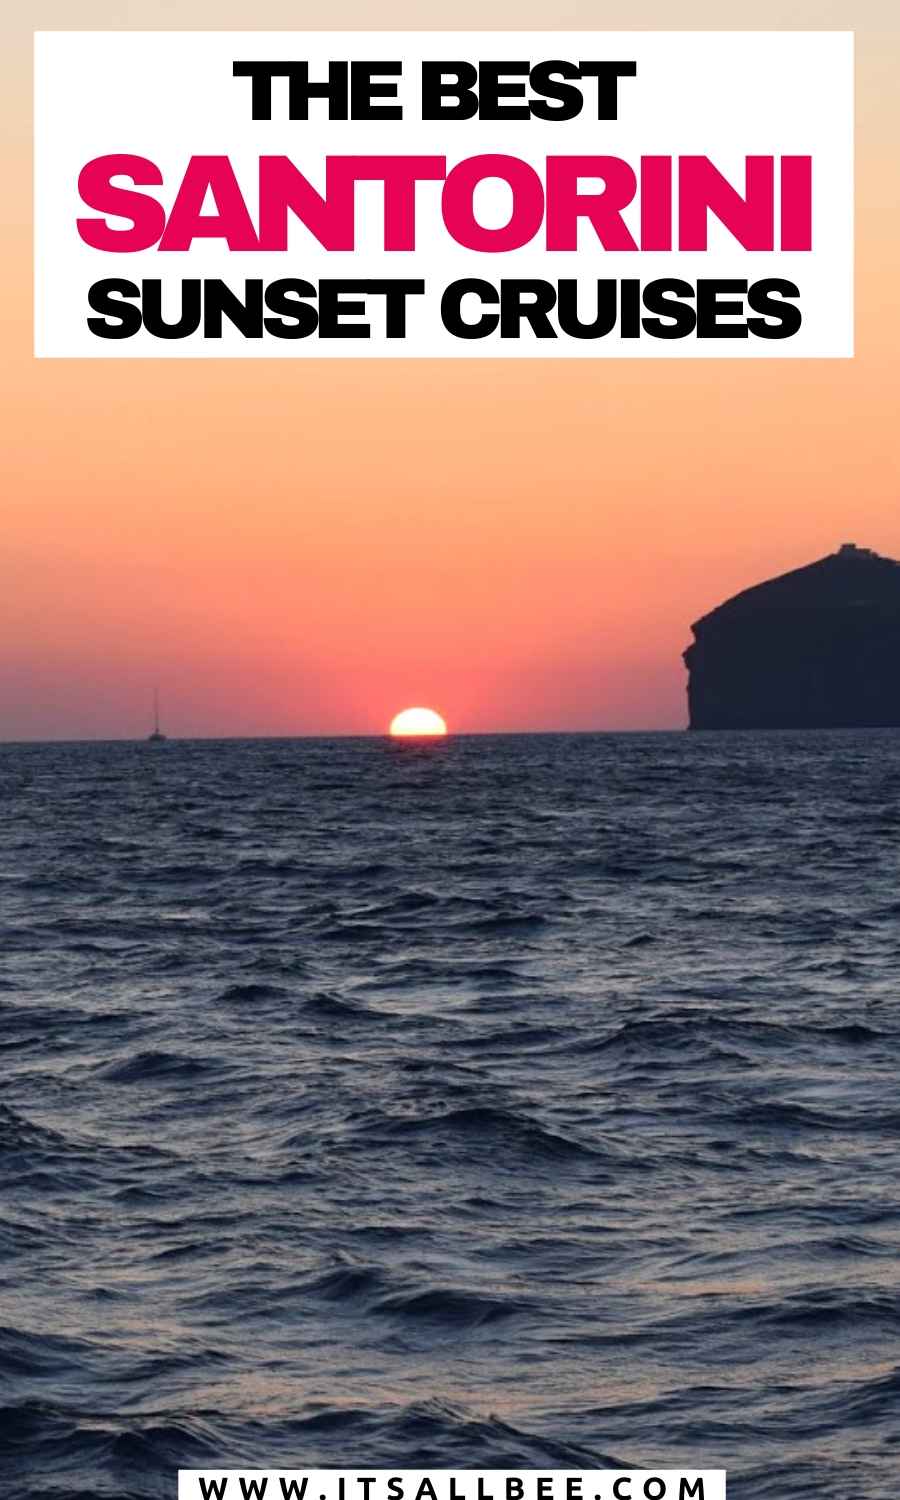 Complete guide to not only the best santorini boat tours